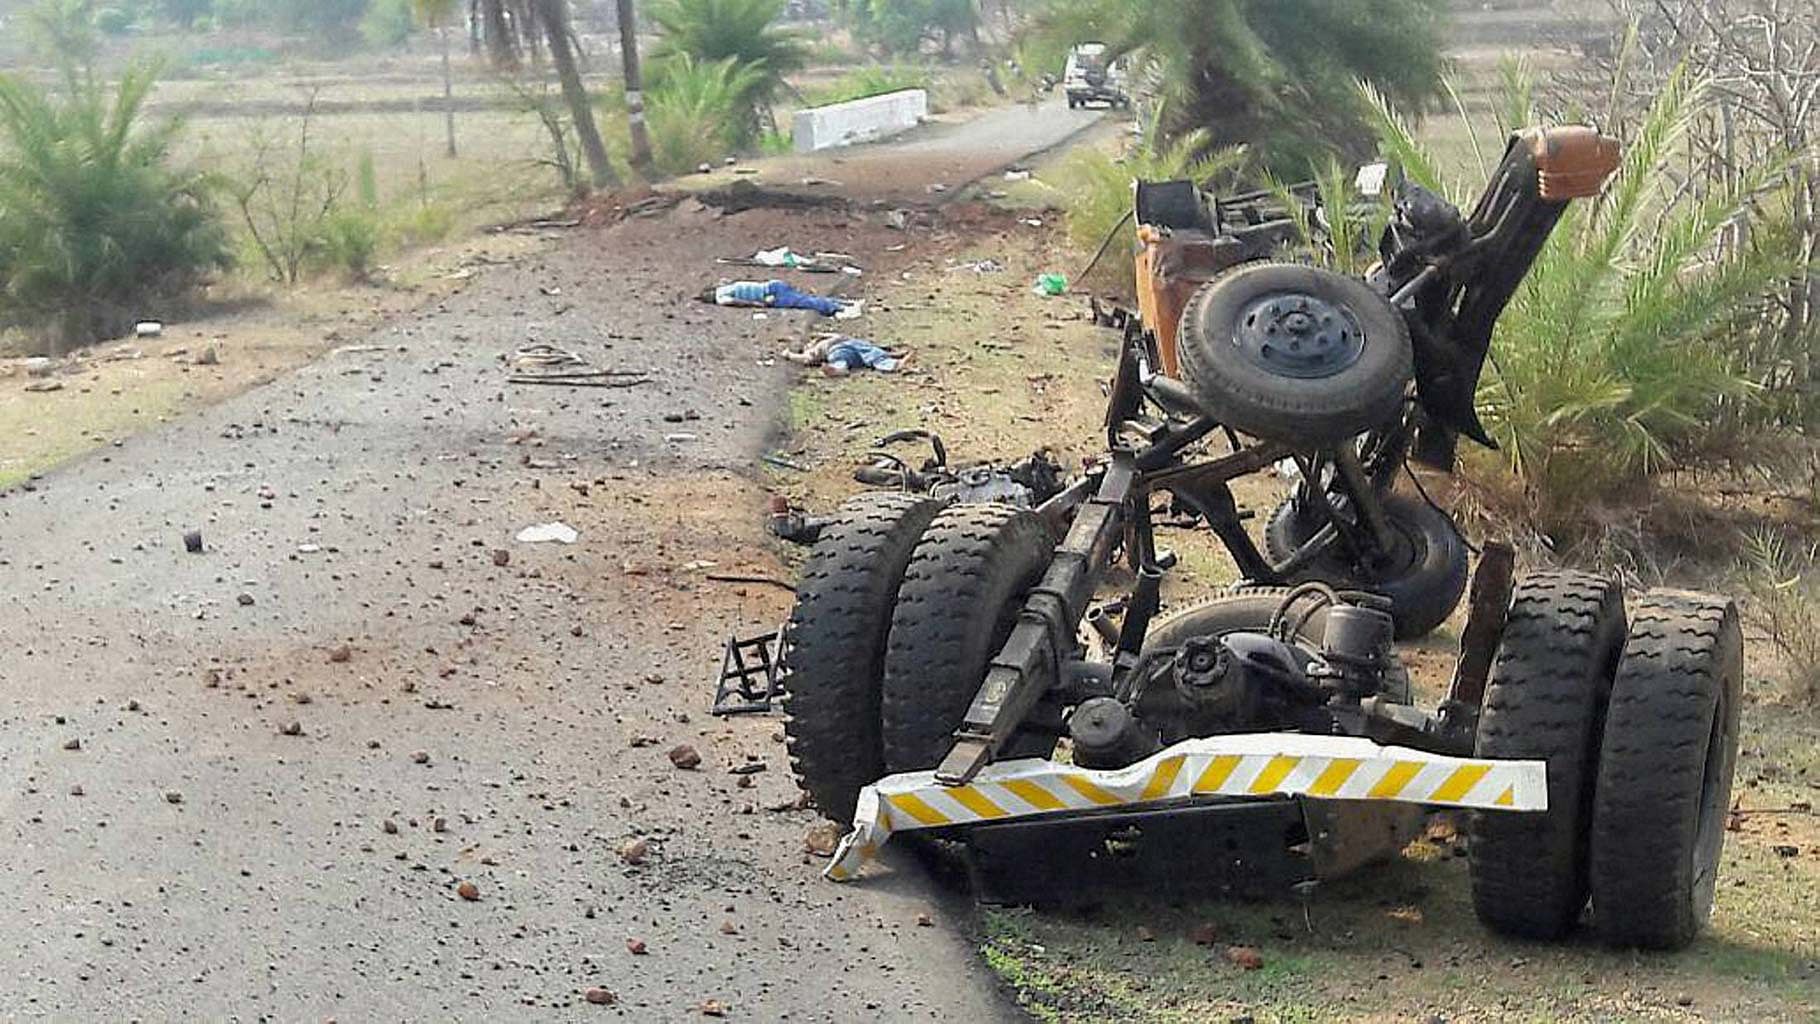 Mangled remains of a CRPF vehicle after a Naxal attack on a CRPF convoy in Dantewada on Wednesday, 30 March 2016. (Photo: PTI)